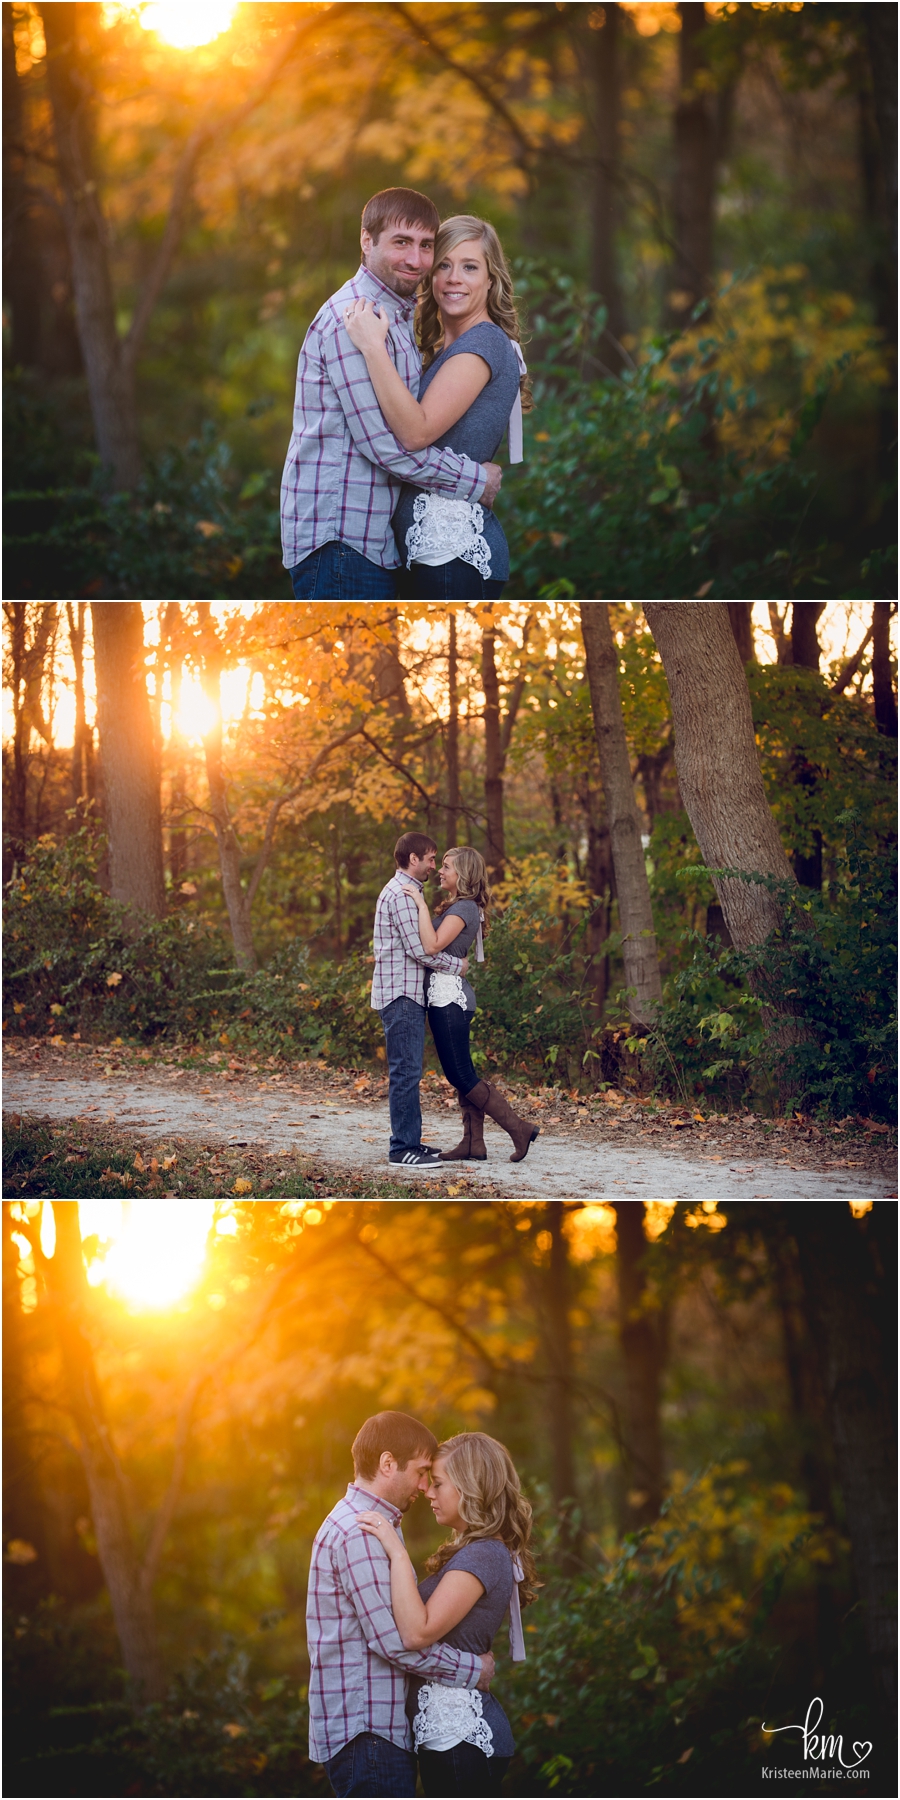 sunset - golden hour is the best time for outdoor pictures